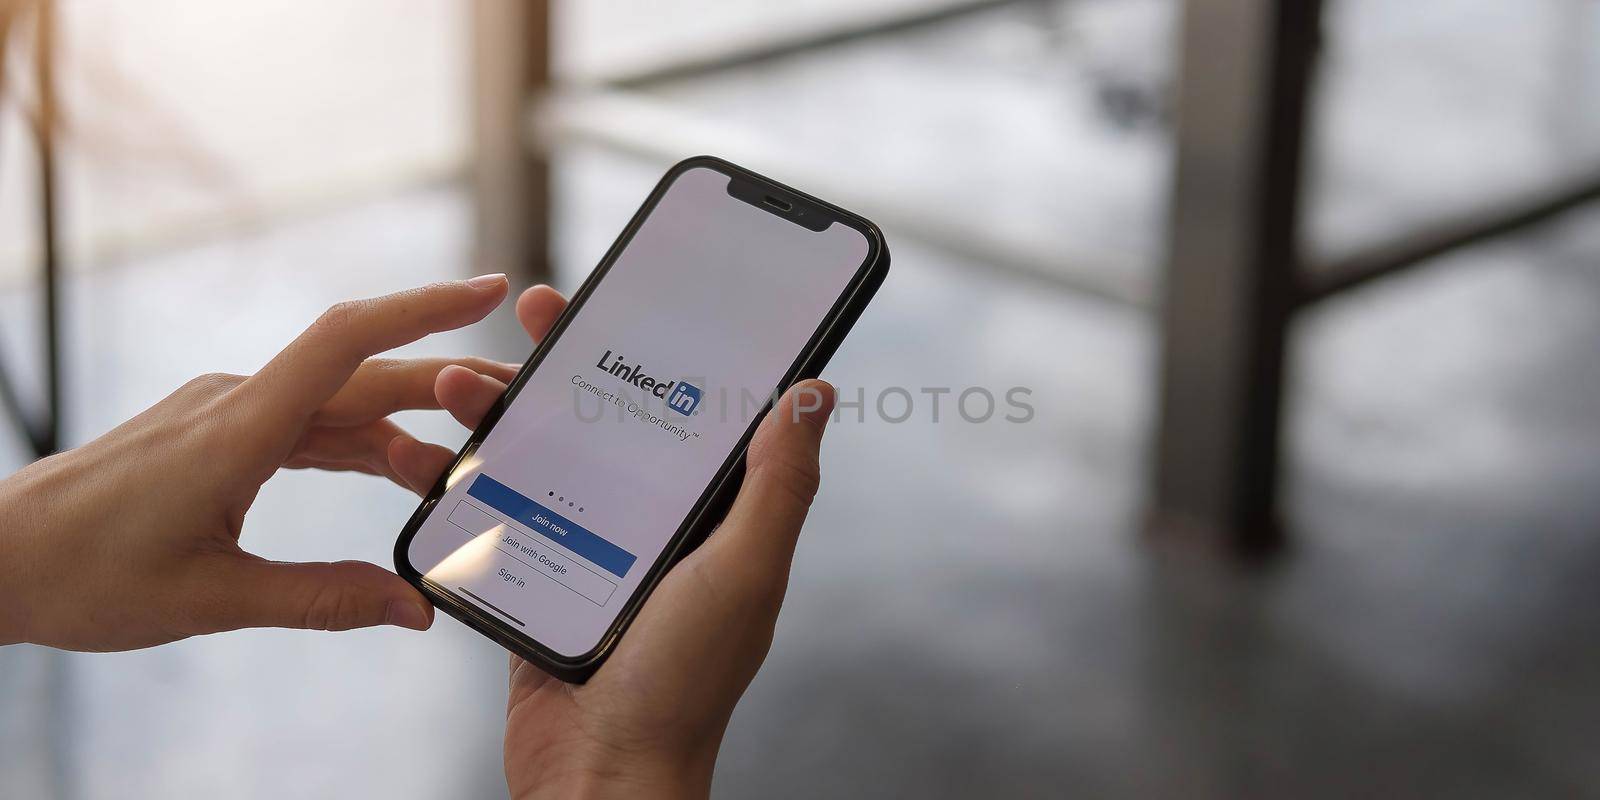 CHIANG MAI, THAILAND, DEC 12, 2020 : A women holds Apple iPhone Xs with LinkedIn application on the screen.LinkedIn is a photo-sharing app for smartphones. by wichayada